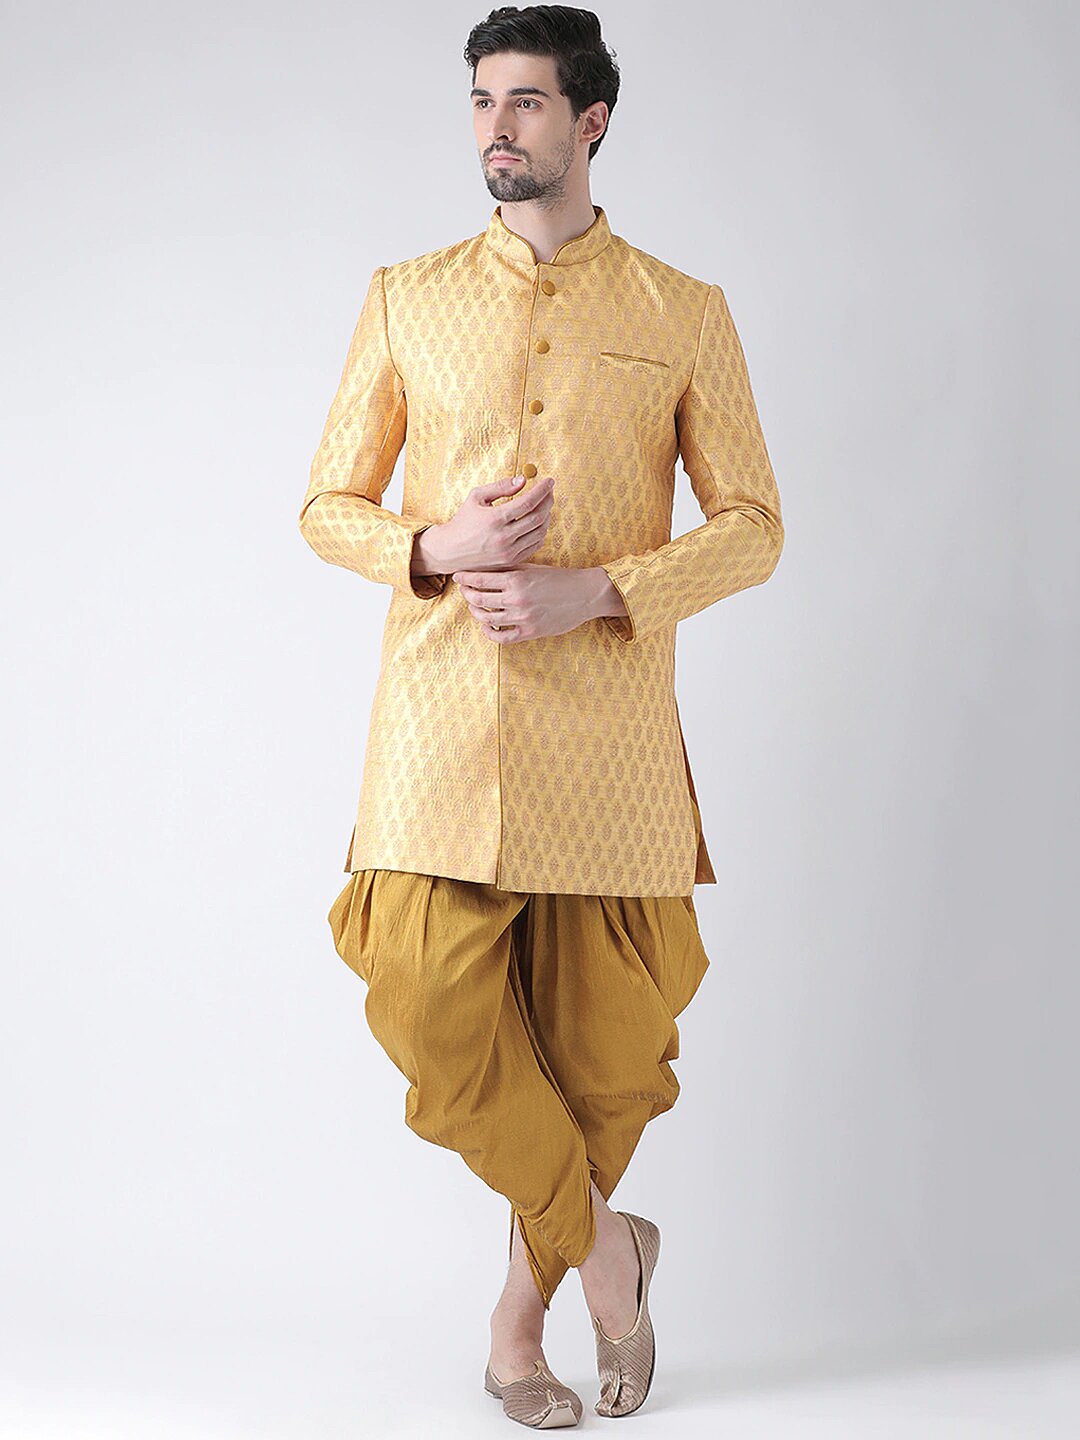 Yellow Sherwani and Dhoti Indian Clothing in Denver, CO, Aurora, CO, Boulder, CO, Fort Collins, CO, Colorado Springs, CO, Parker, CO, Highlands Ranch, CO, Cherry Creek, CO, Centennial, CO, and Longmont, CO. NATIONWIDE SHIPPING USA- India Fashion X